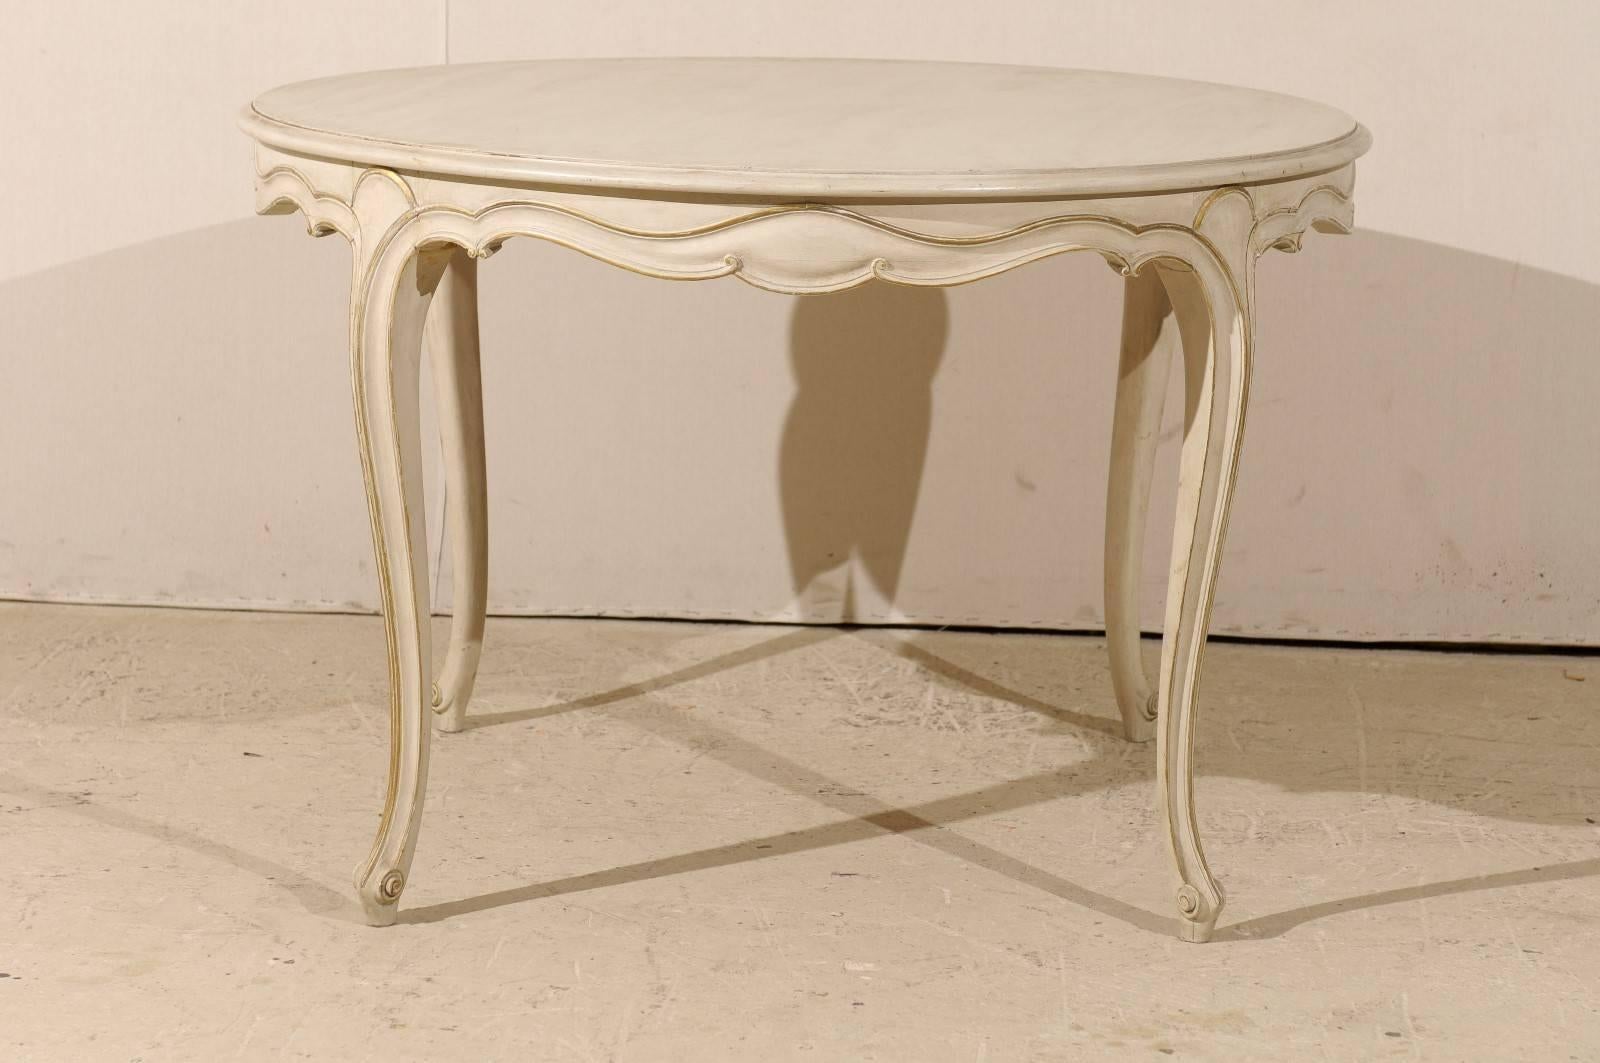 French Louis XV Wood Round Top Centre Table, Neutral Beige with Gilded Accents 2